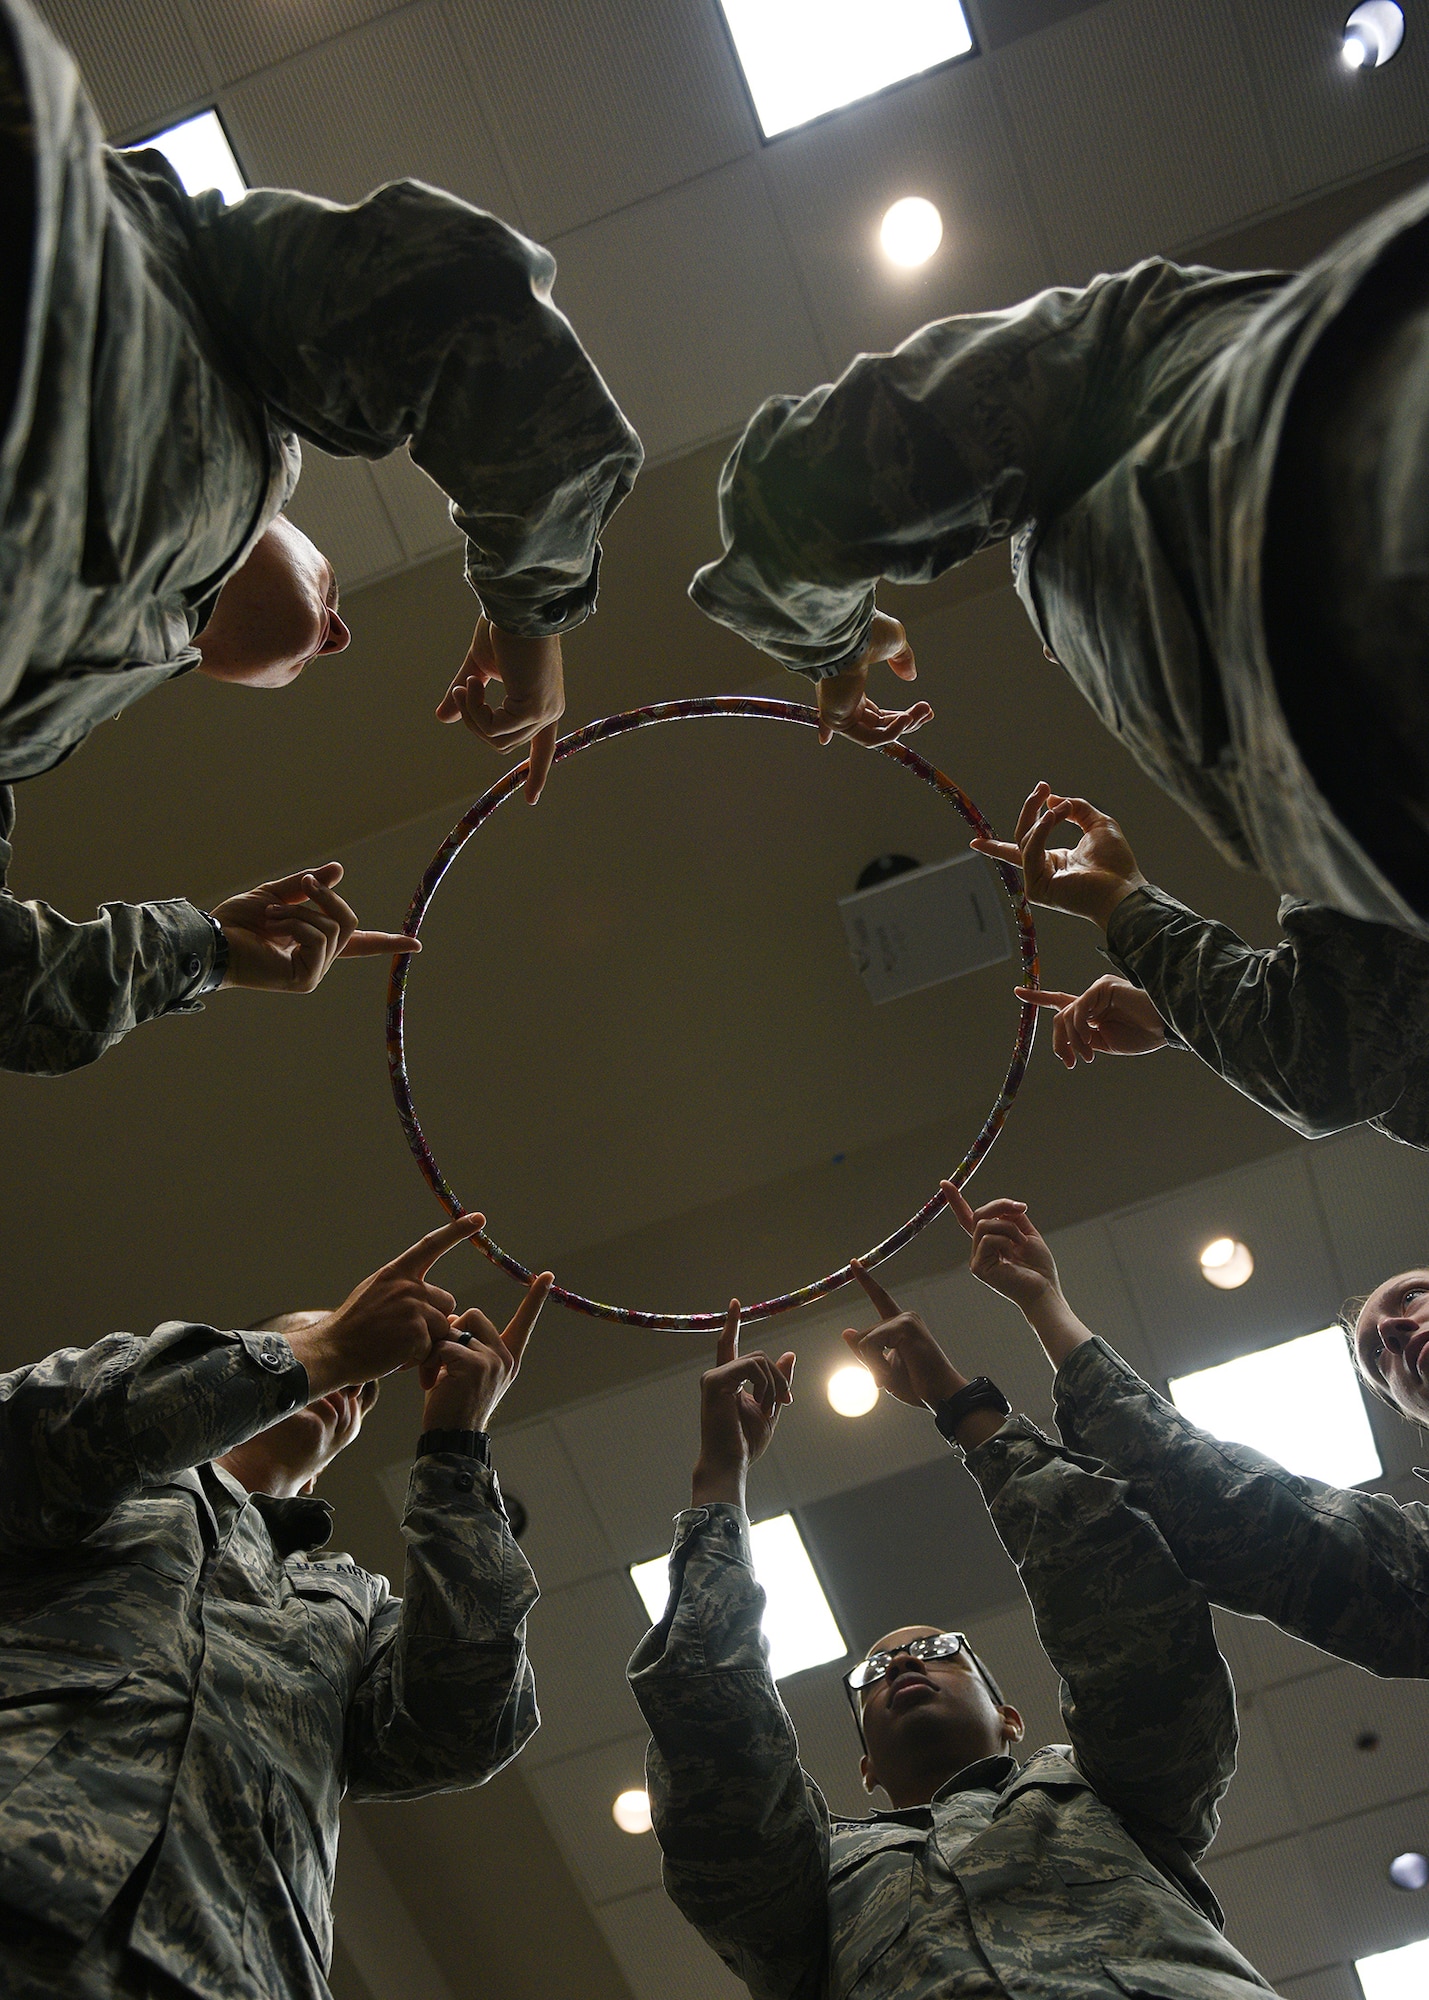 Five technical training students attempt to complete a teamwork exercise during the Mental Fitness Obstacle Course at the event center on Goodfellow Air Force Base, Texas, July 2, 2019. The course consisted of groups of students performing strenuous physical activity followed by performing cognitive and mental skills to highlight the link between physical and mental fitness. (U.S. Air Force photo by Staff Sgt. Chad Warren/Released)